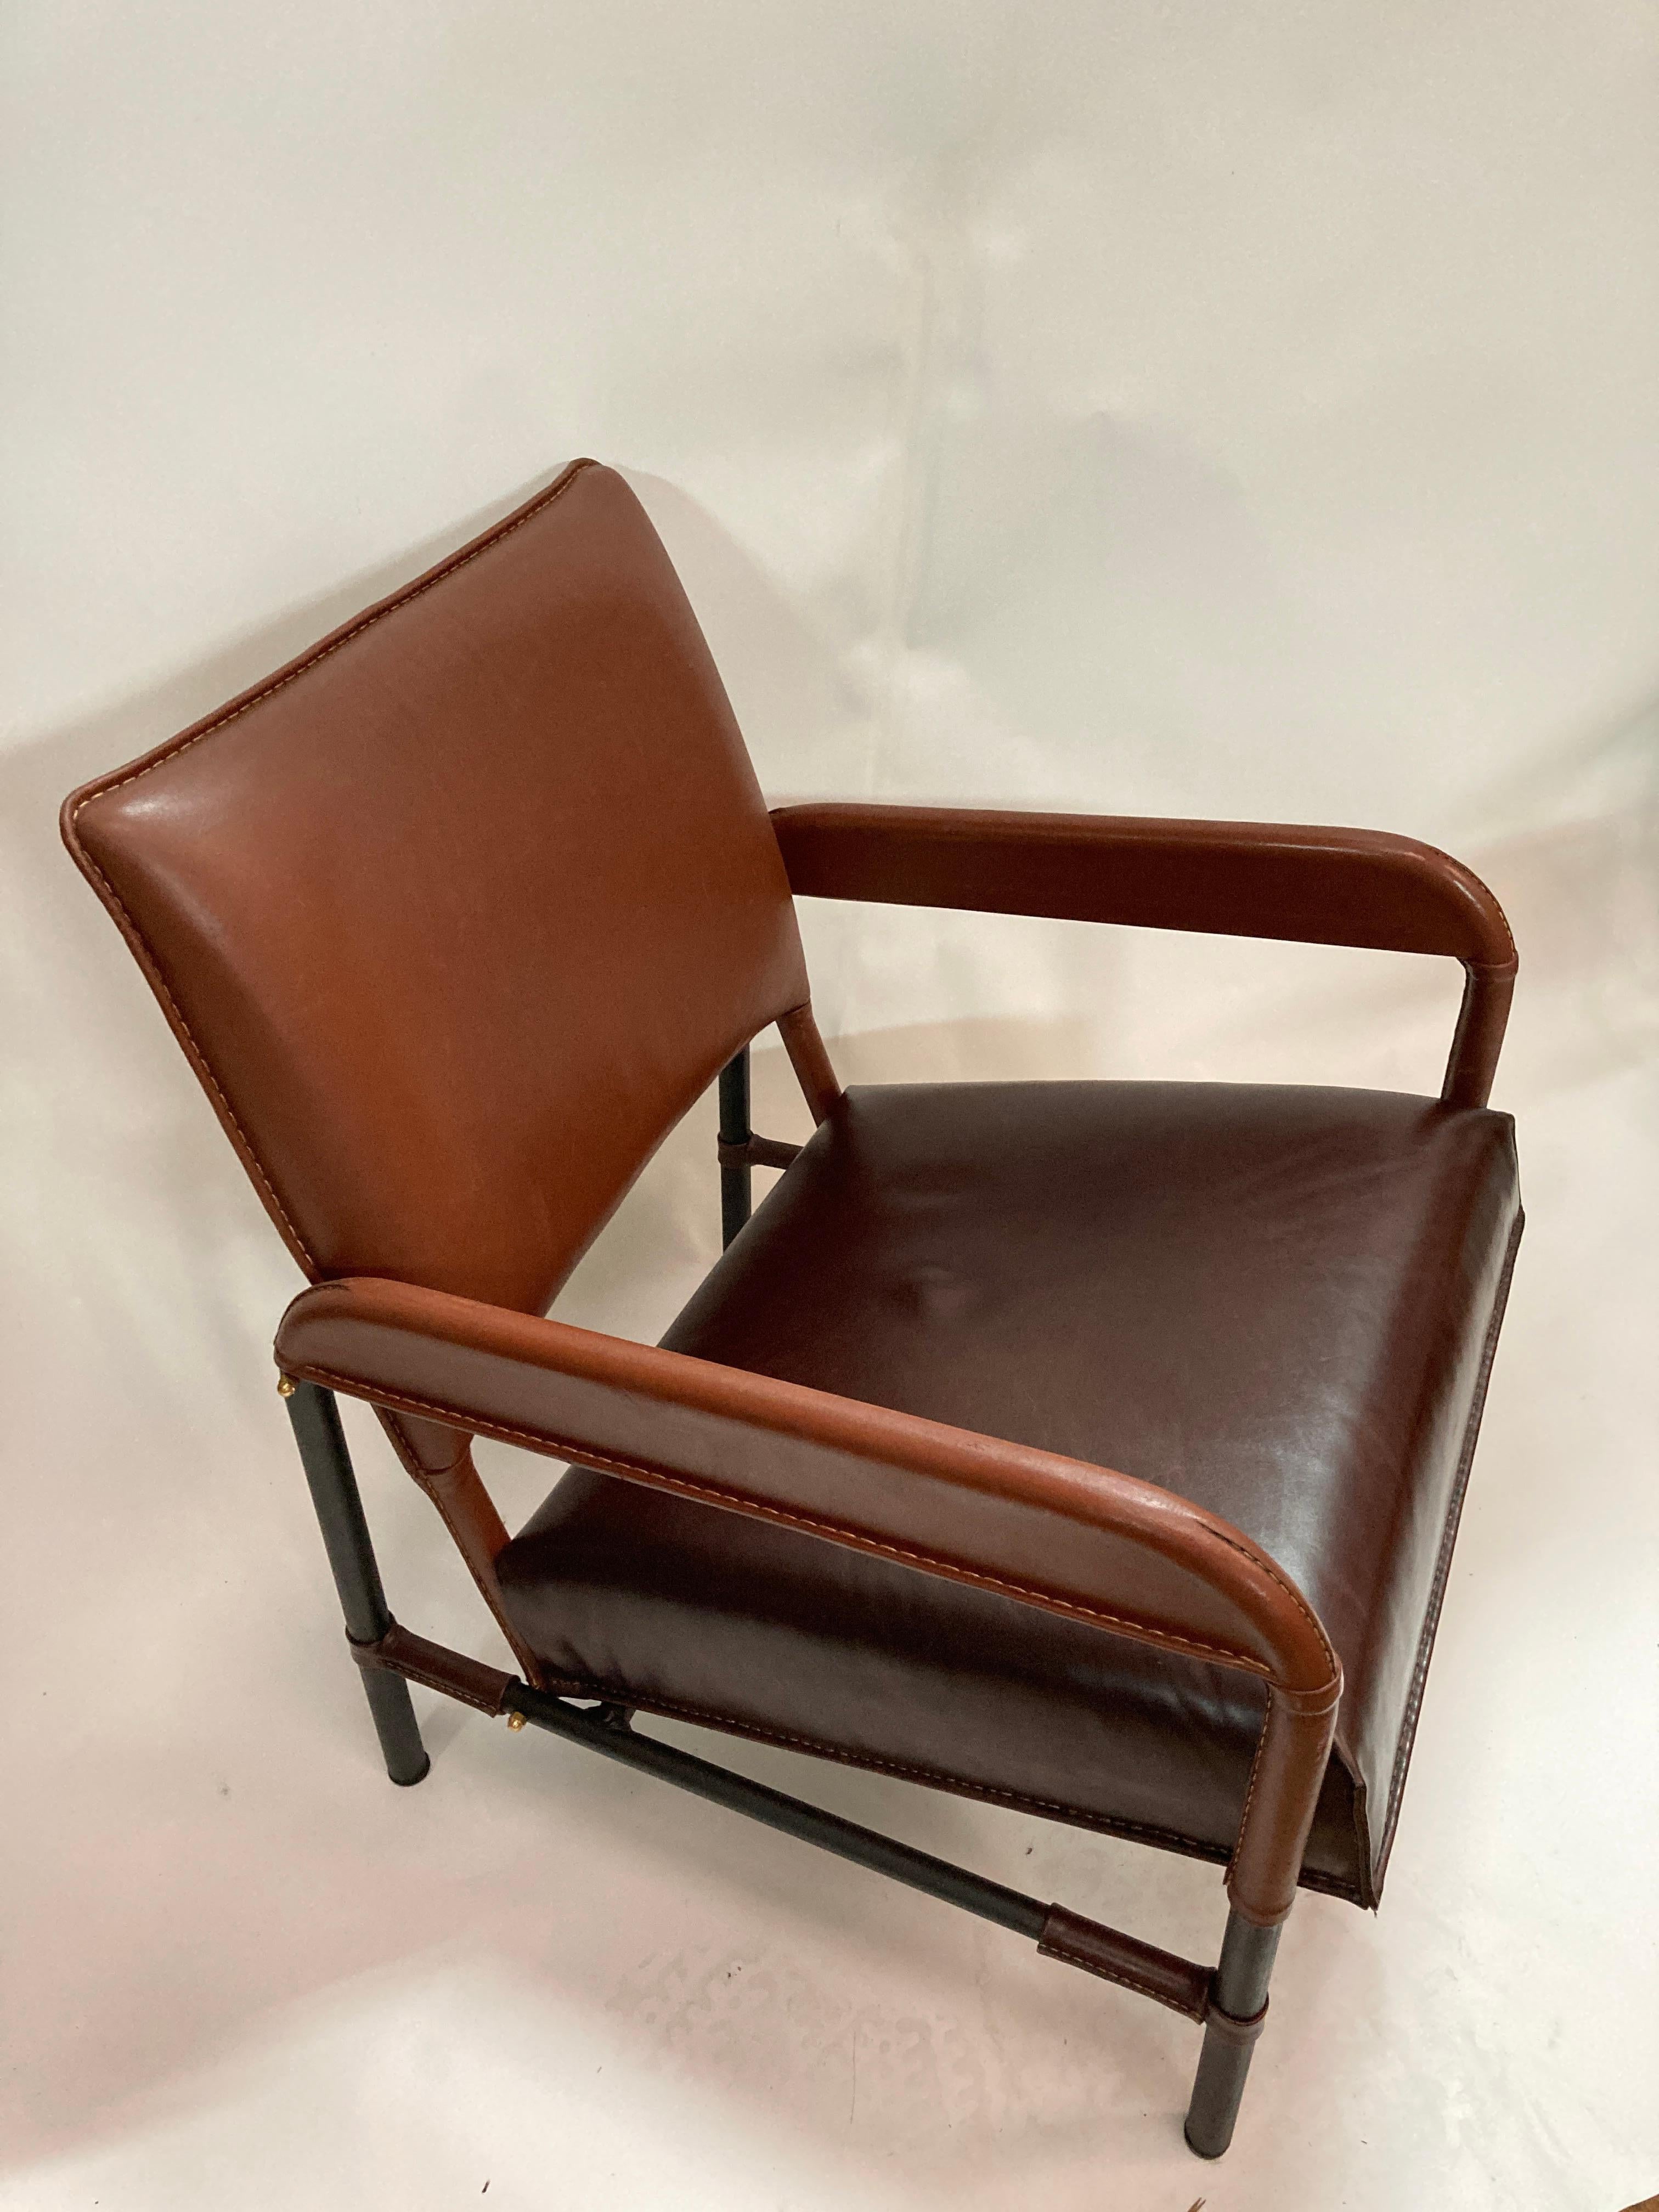 1950's stitched leather armchair by Jacques Adnet
Made for transatlantic and air France company 
Bi-color of brown leather
Great condition